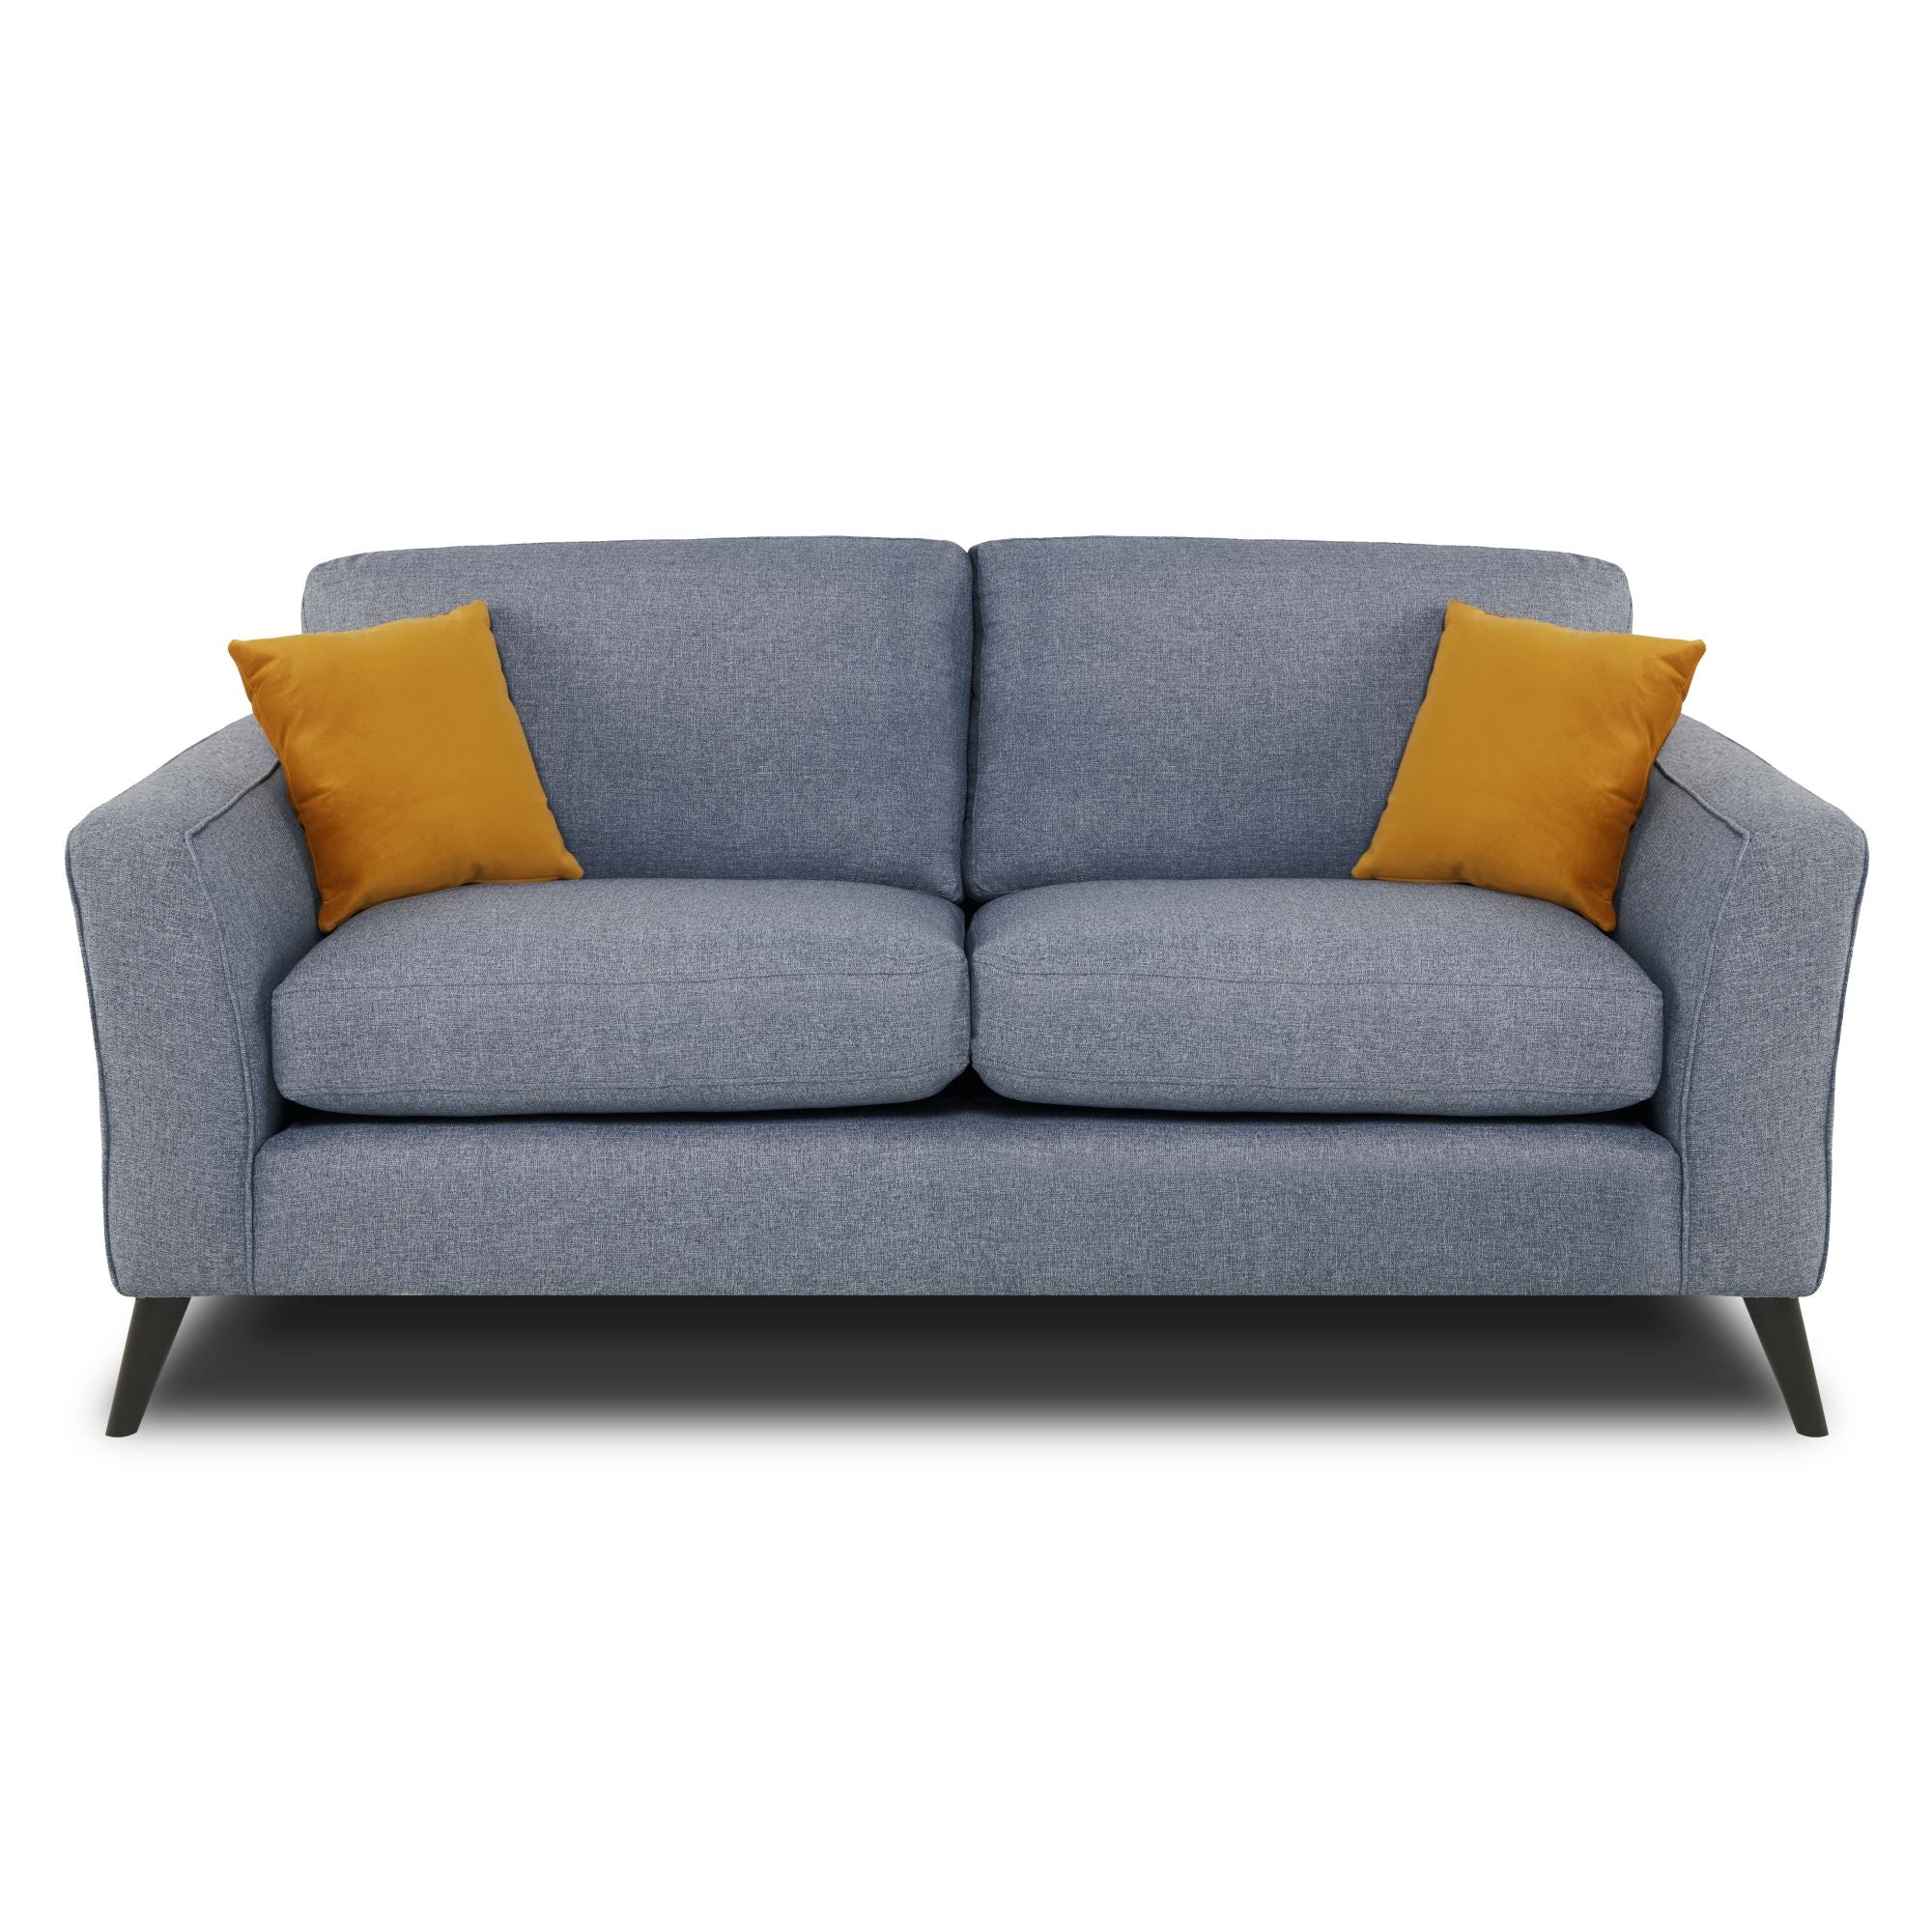 Libby 3 seater sofa in denim face on with a white background 